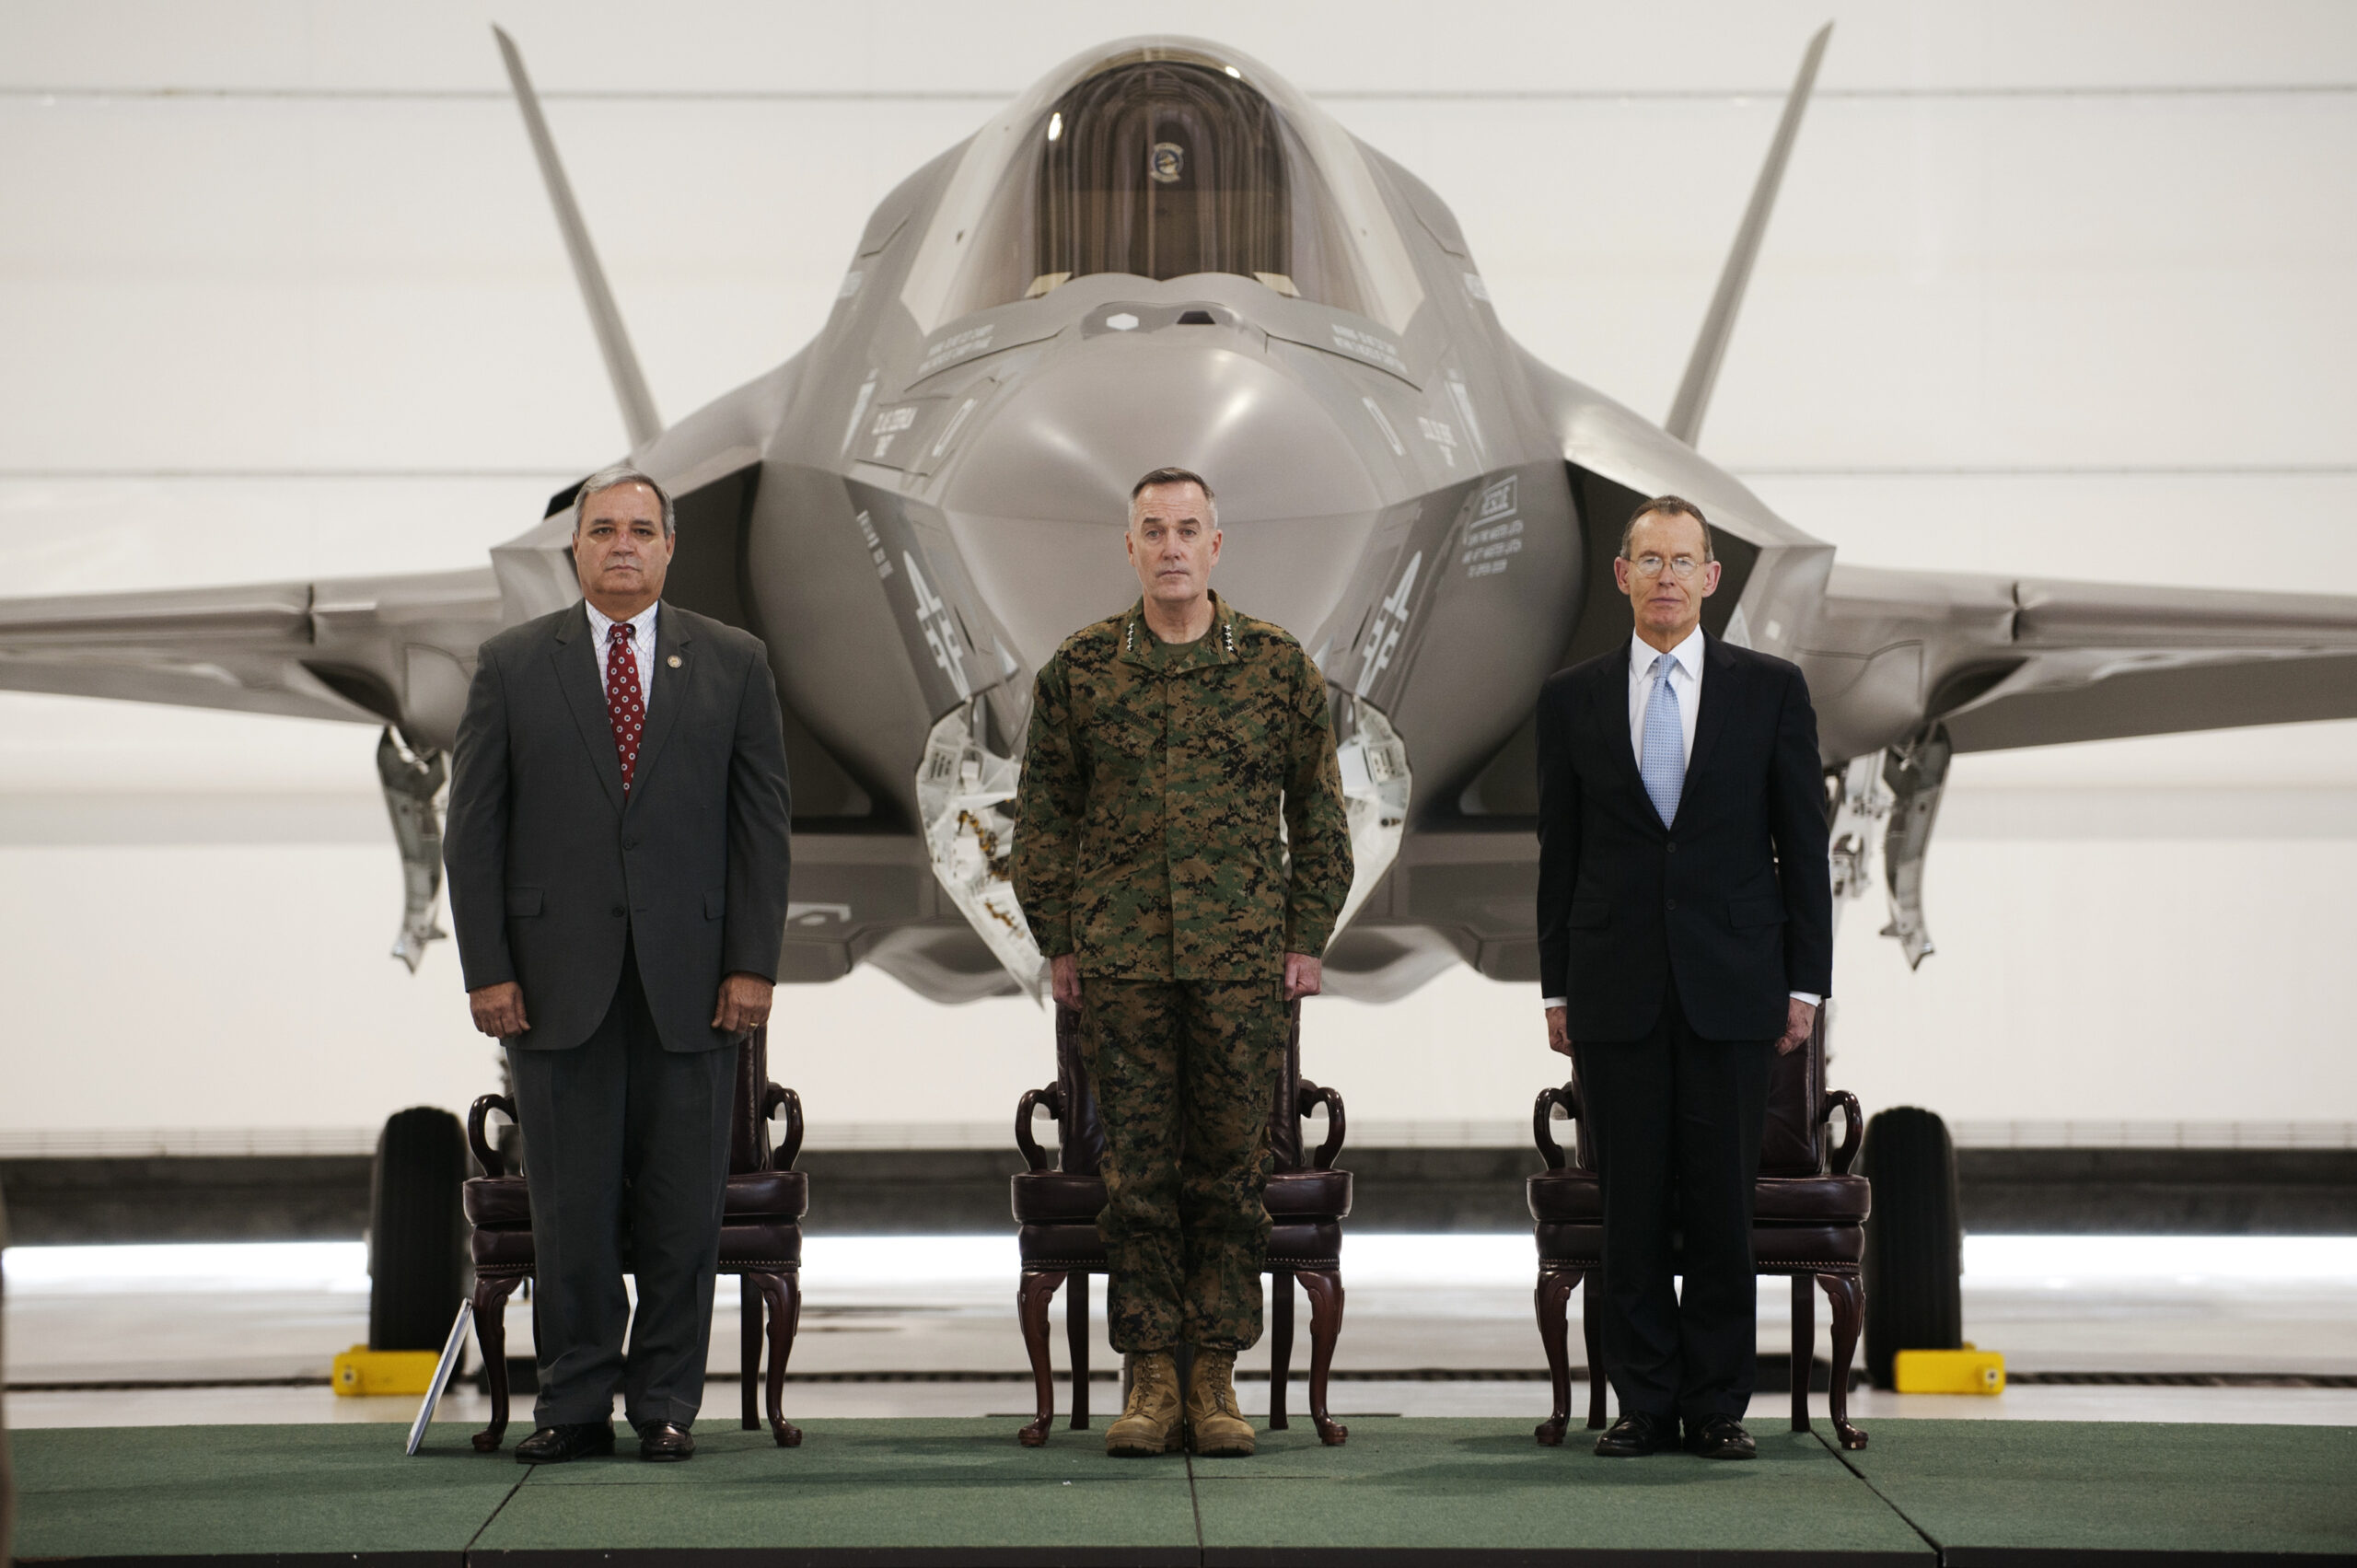 March of the Four–Stars: The Role of Retired Generals and Admirals in the Arms Industry